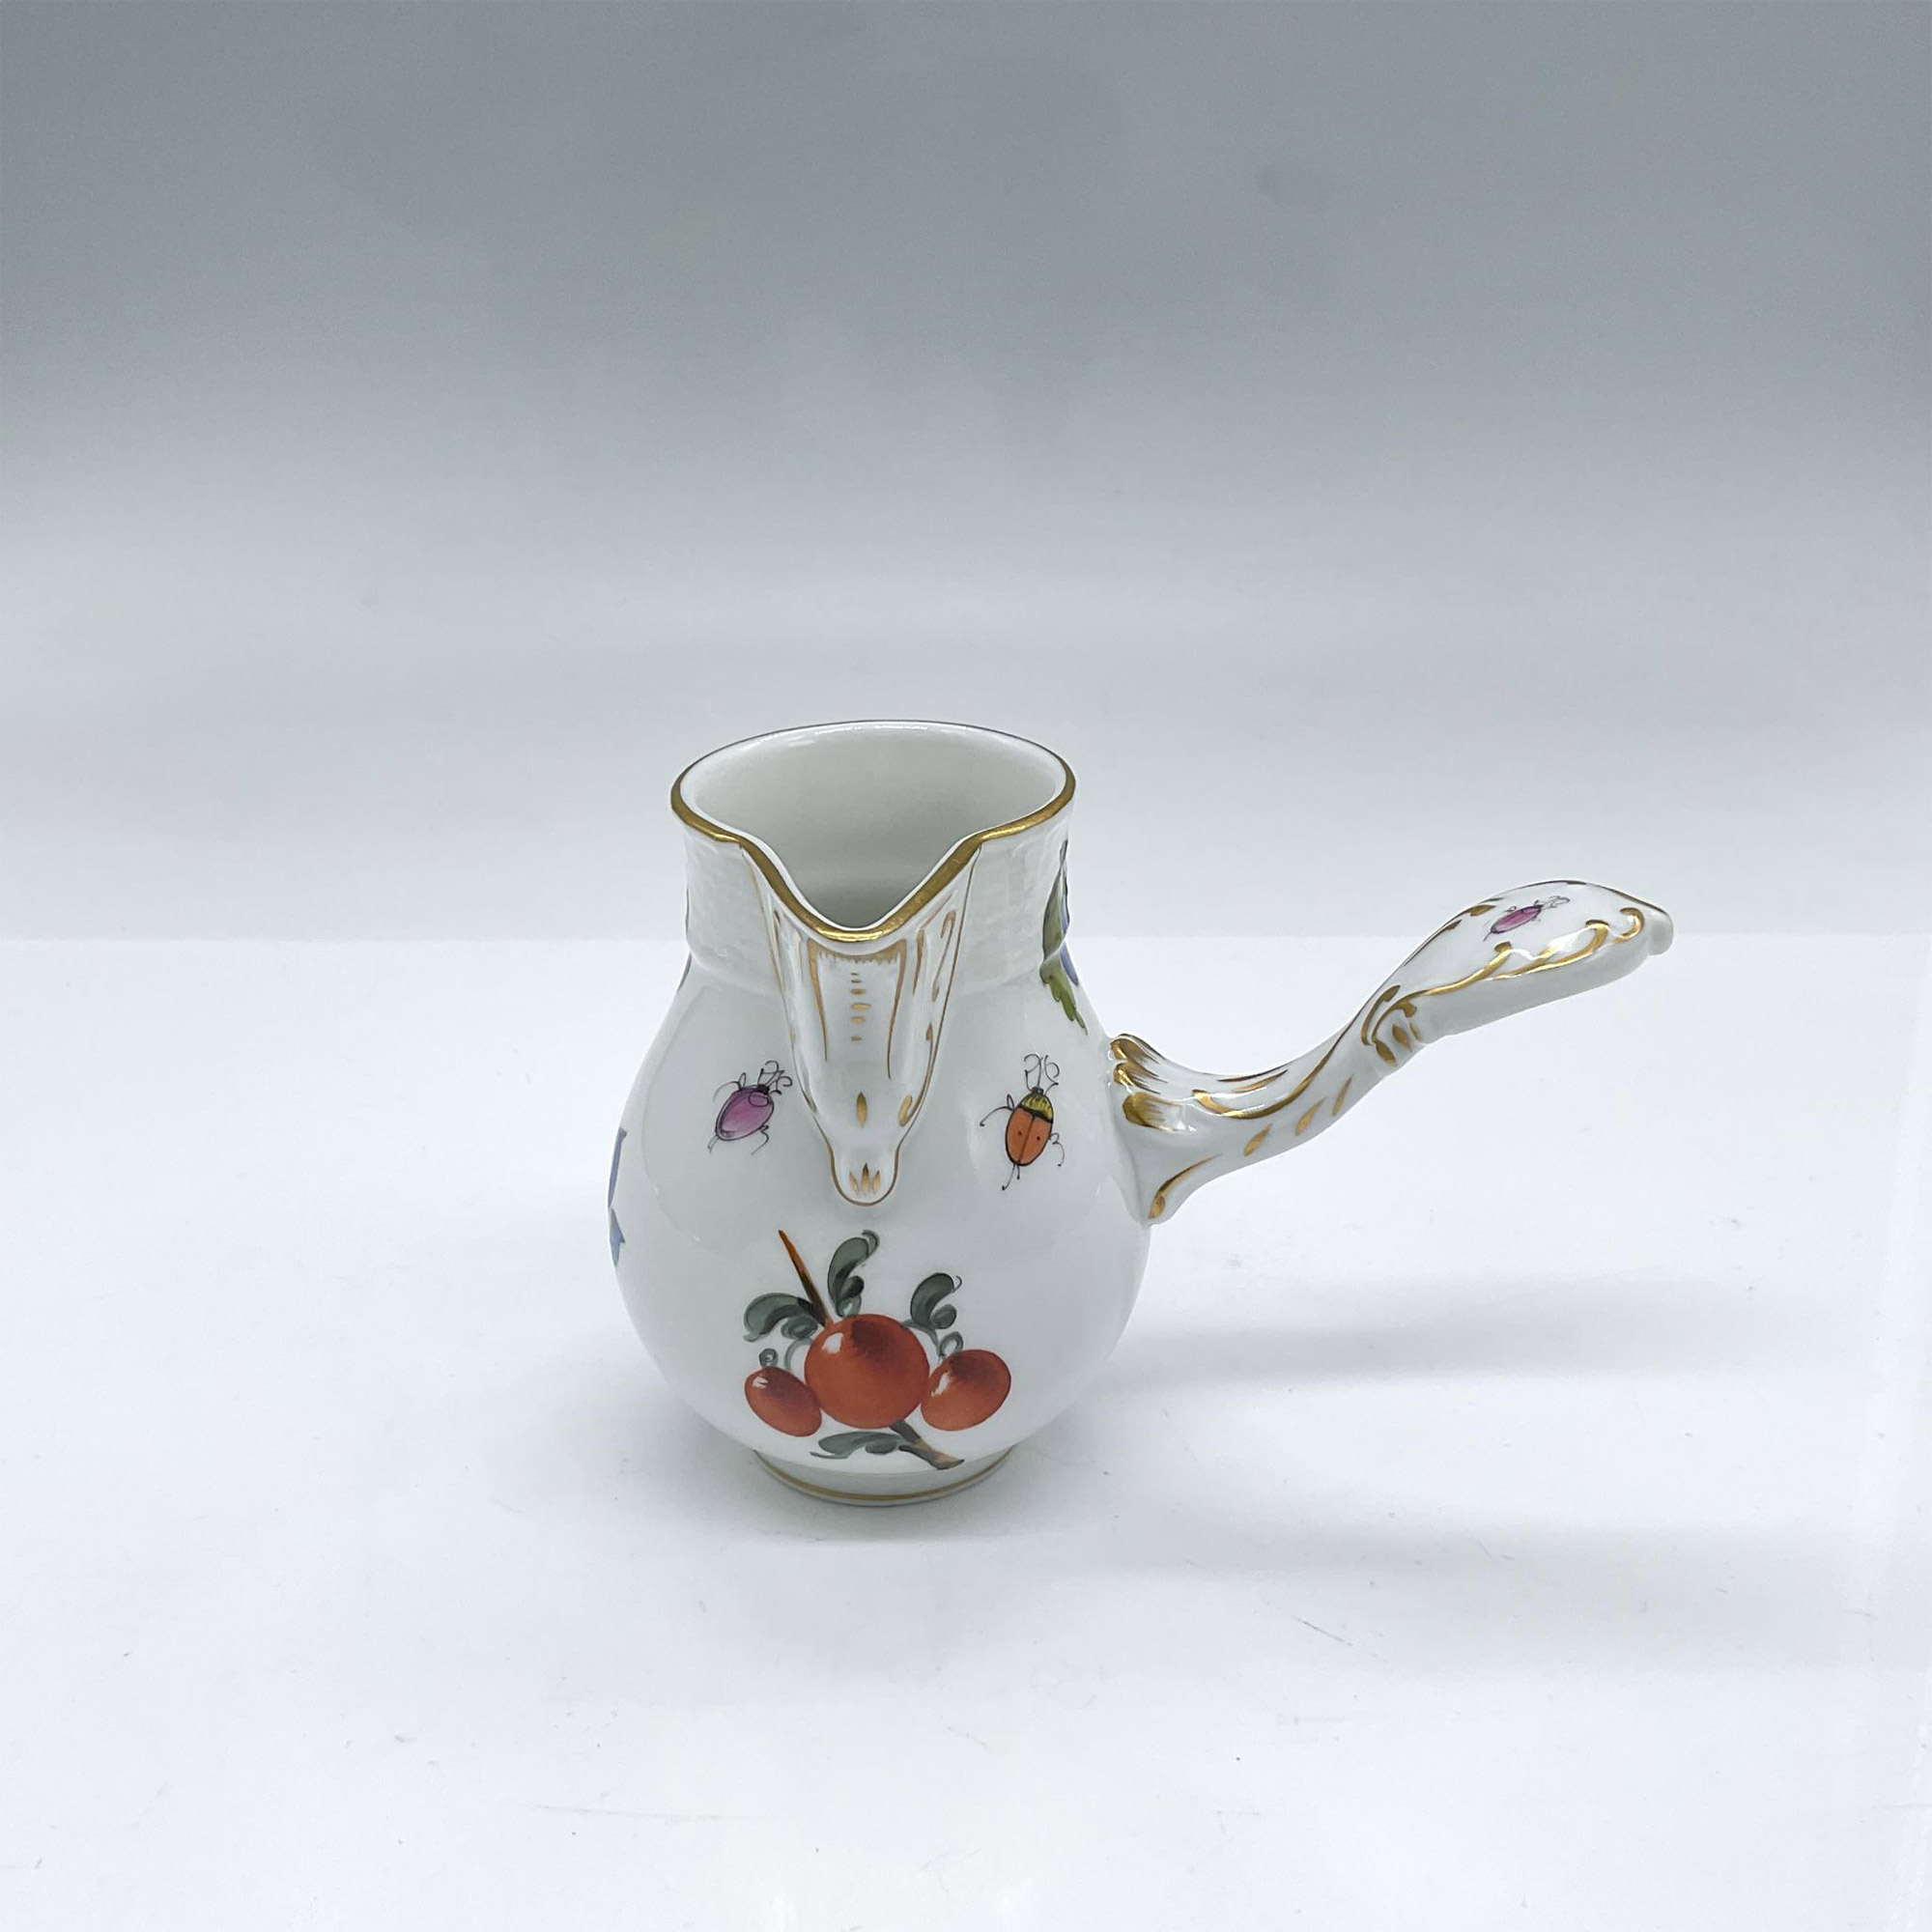 2pc Herend Patty Pan + Sauce Pitcher, Flowers/Butterflies - Image 6 of 10